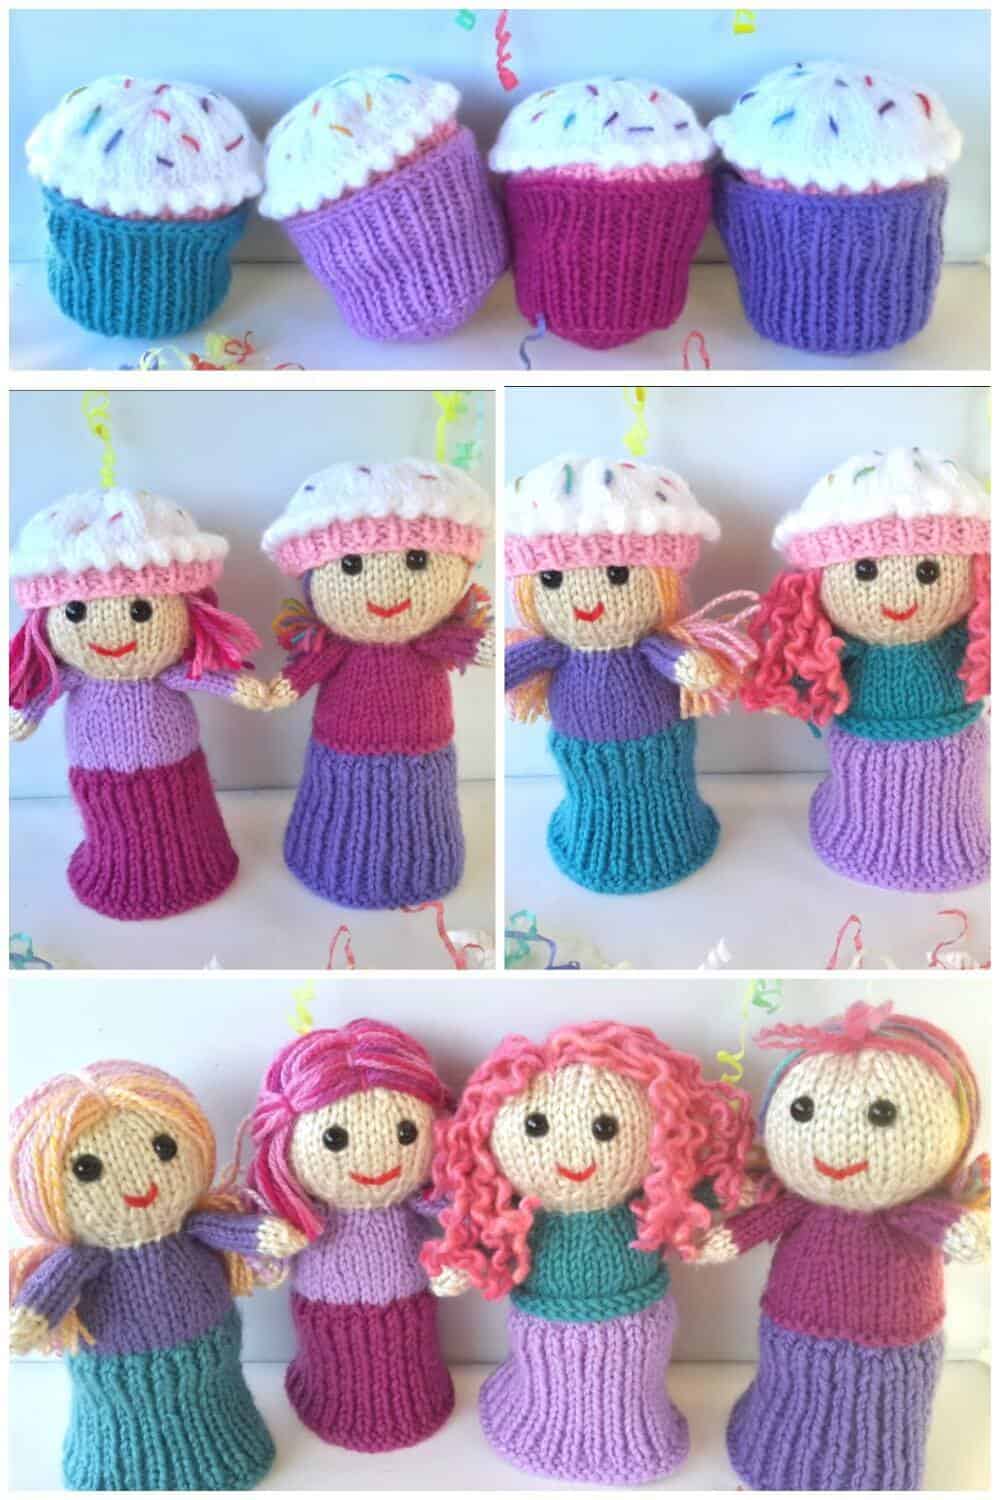 Knitted cupcake dolls